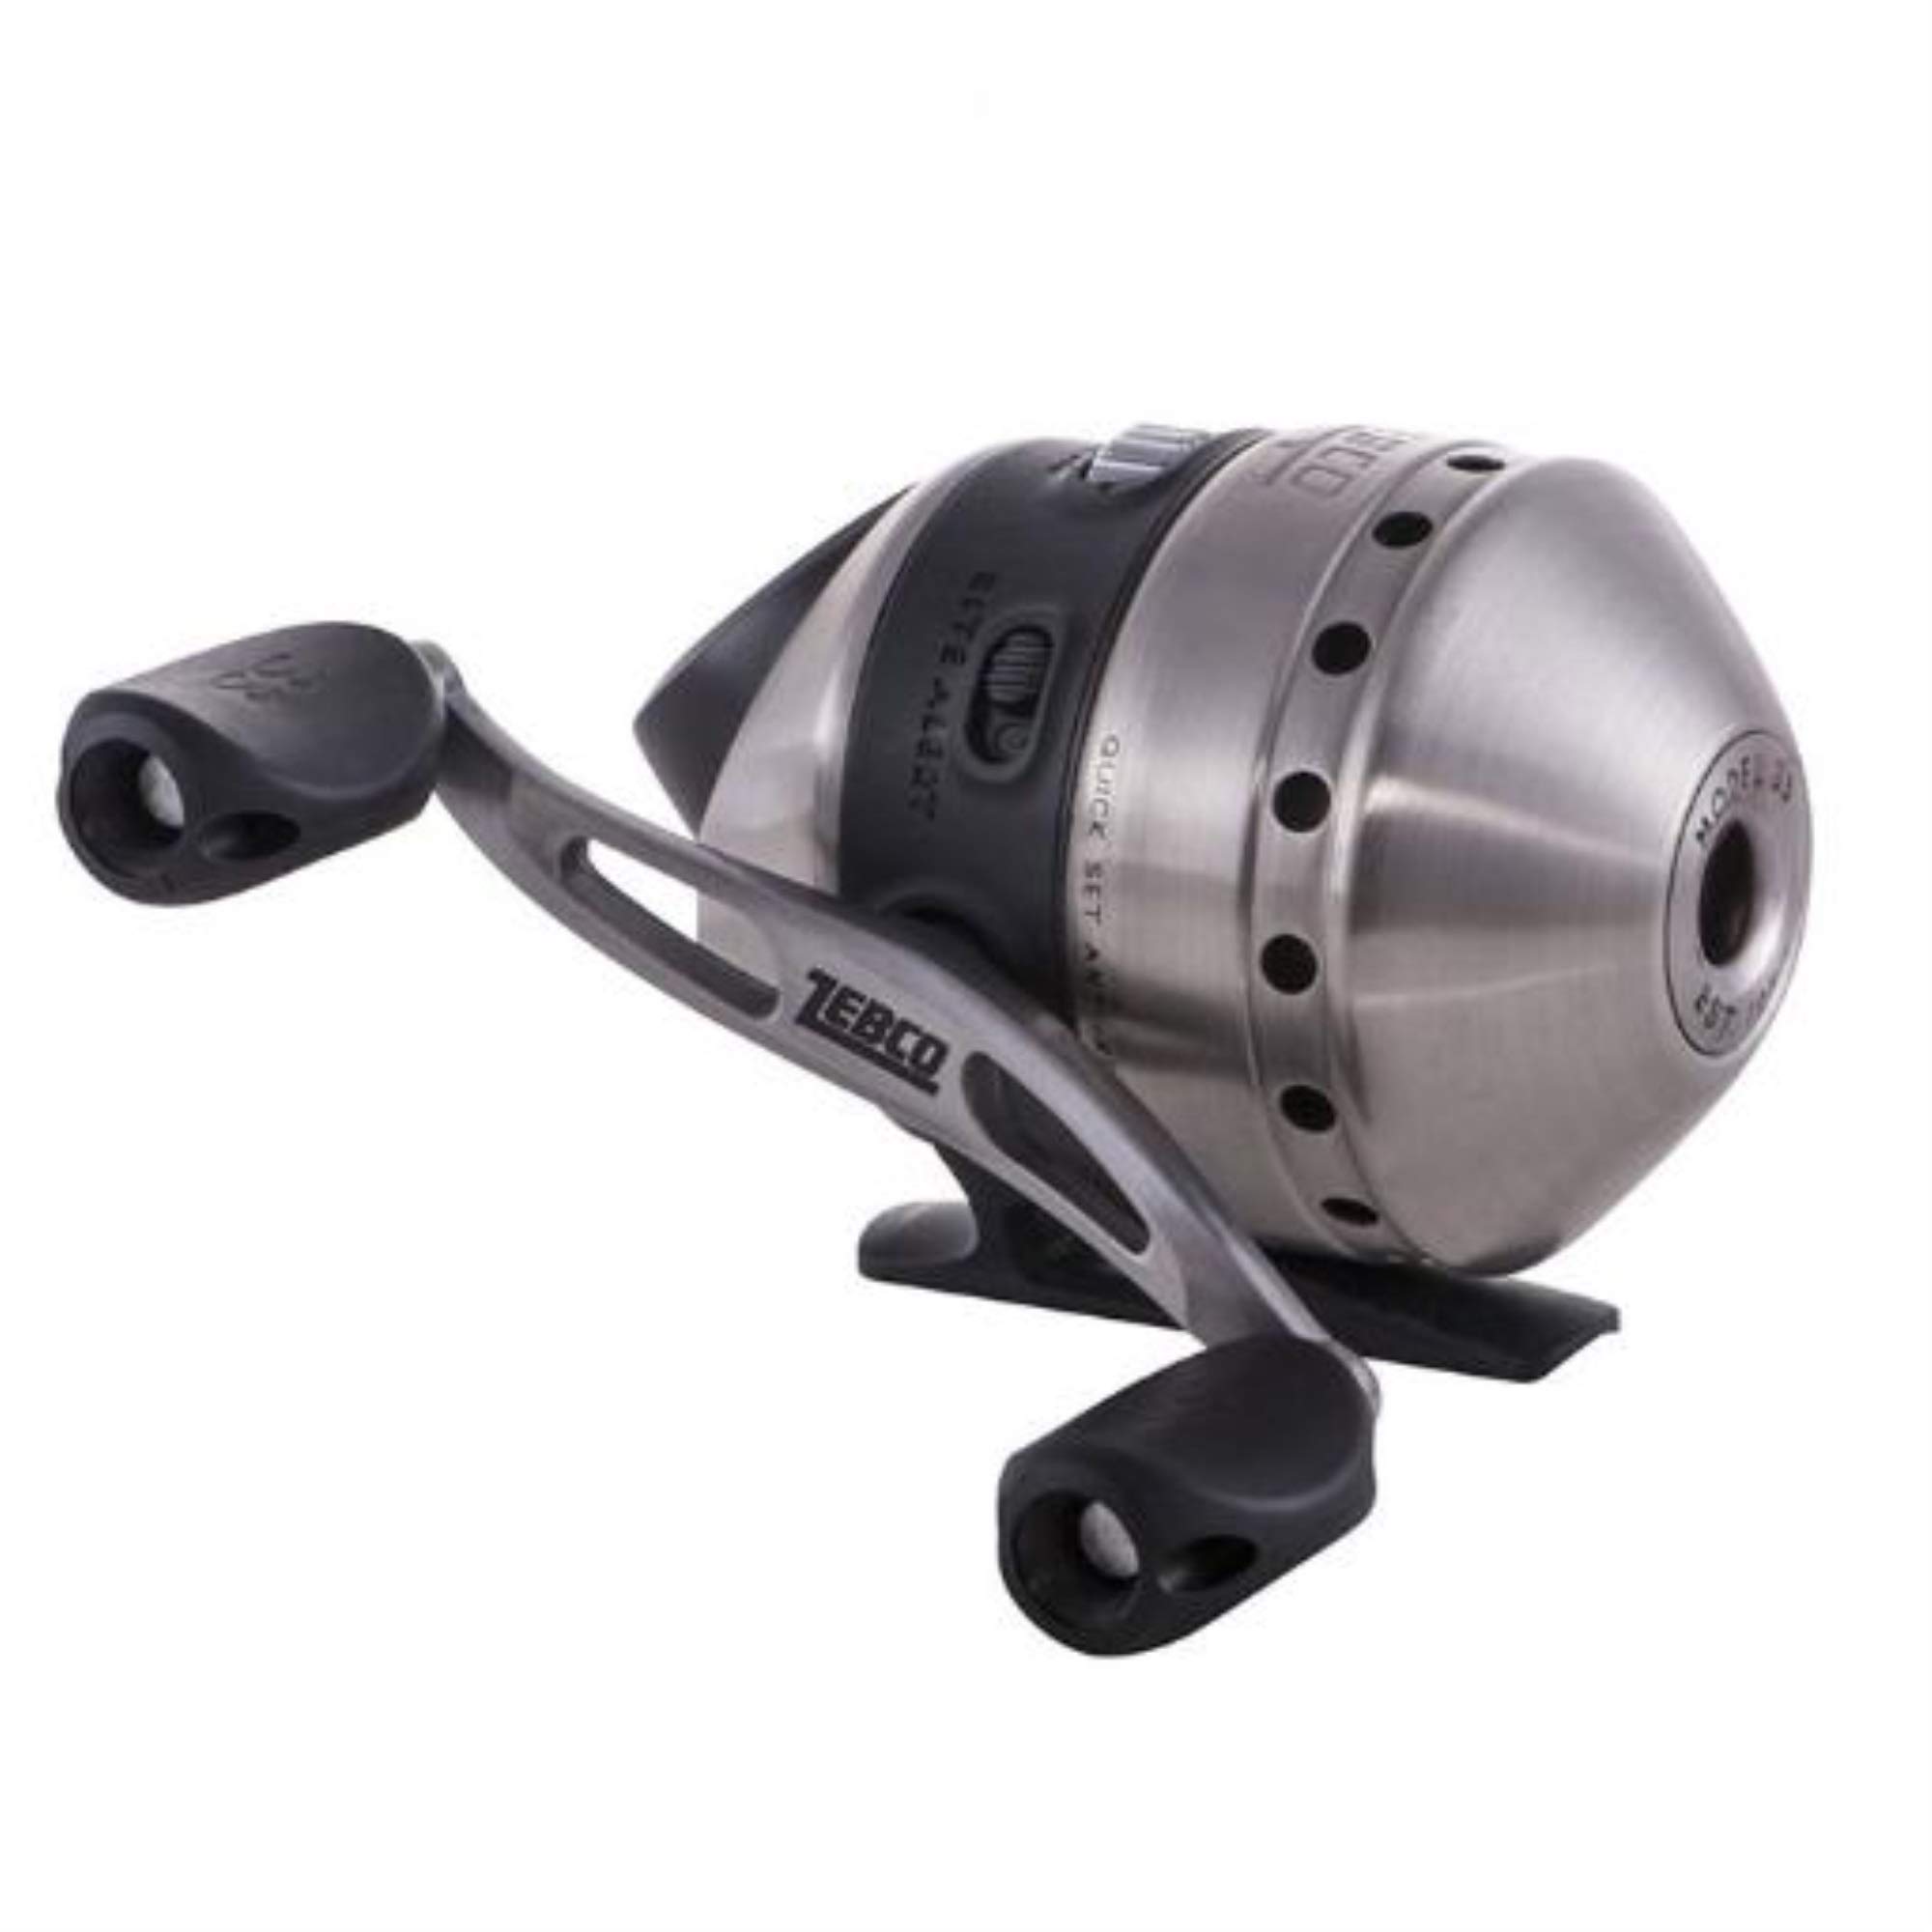 Buy Zebco 33 Micro Spinning Reel and 2-Piece Fishing Rod Combo, 5